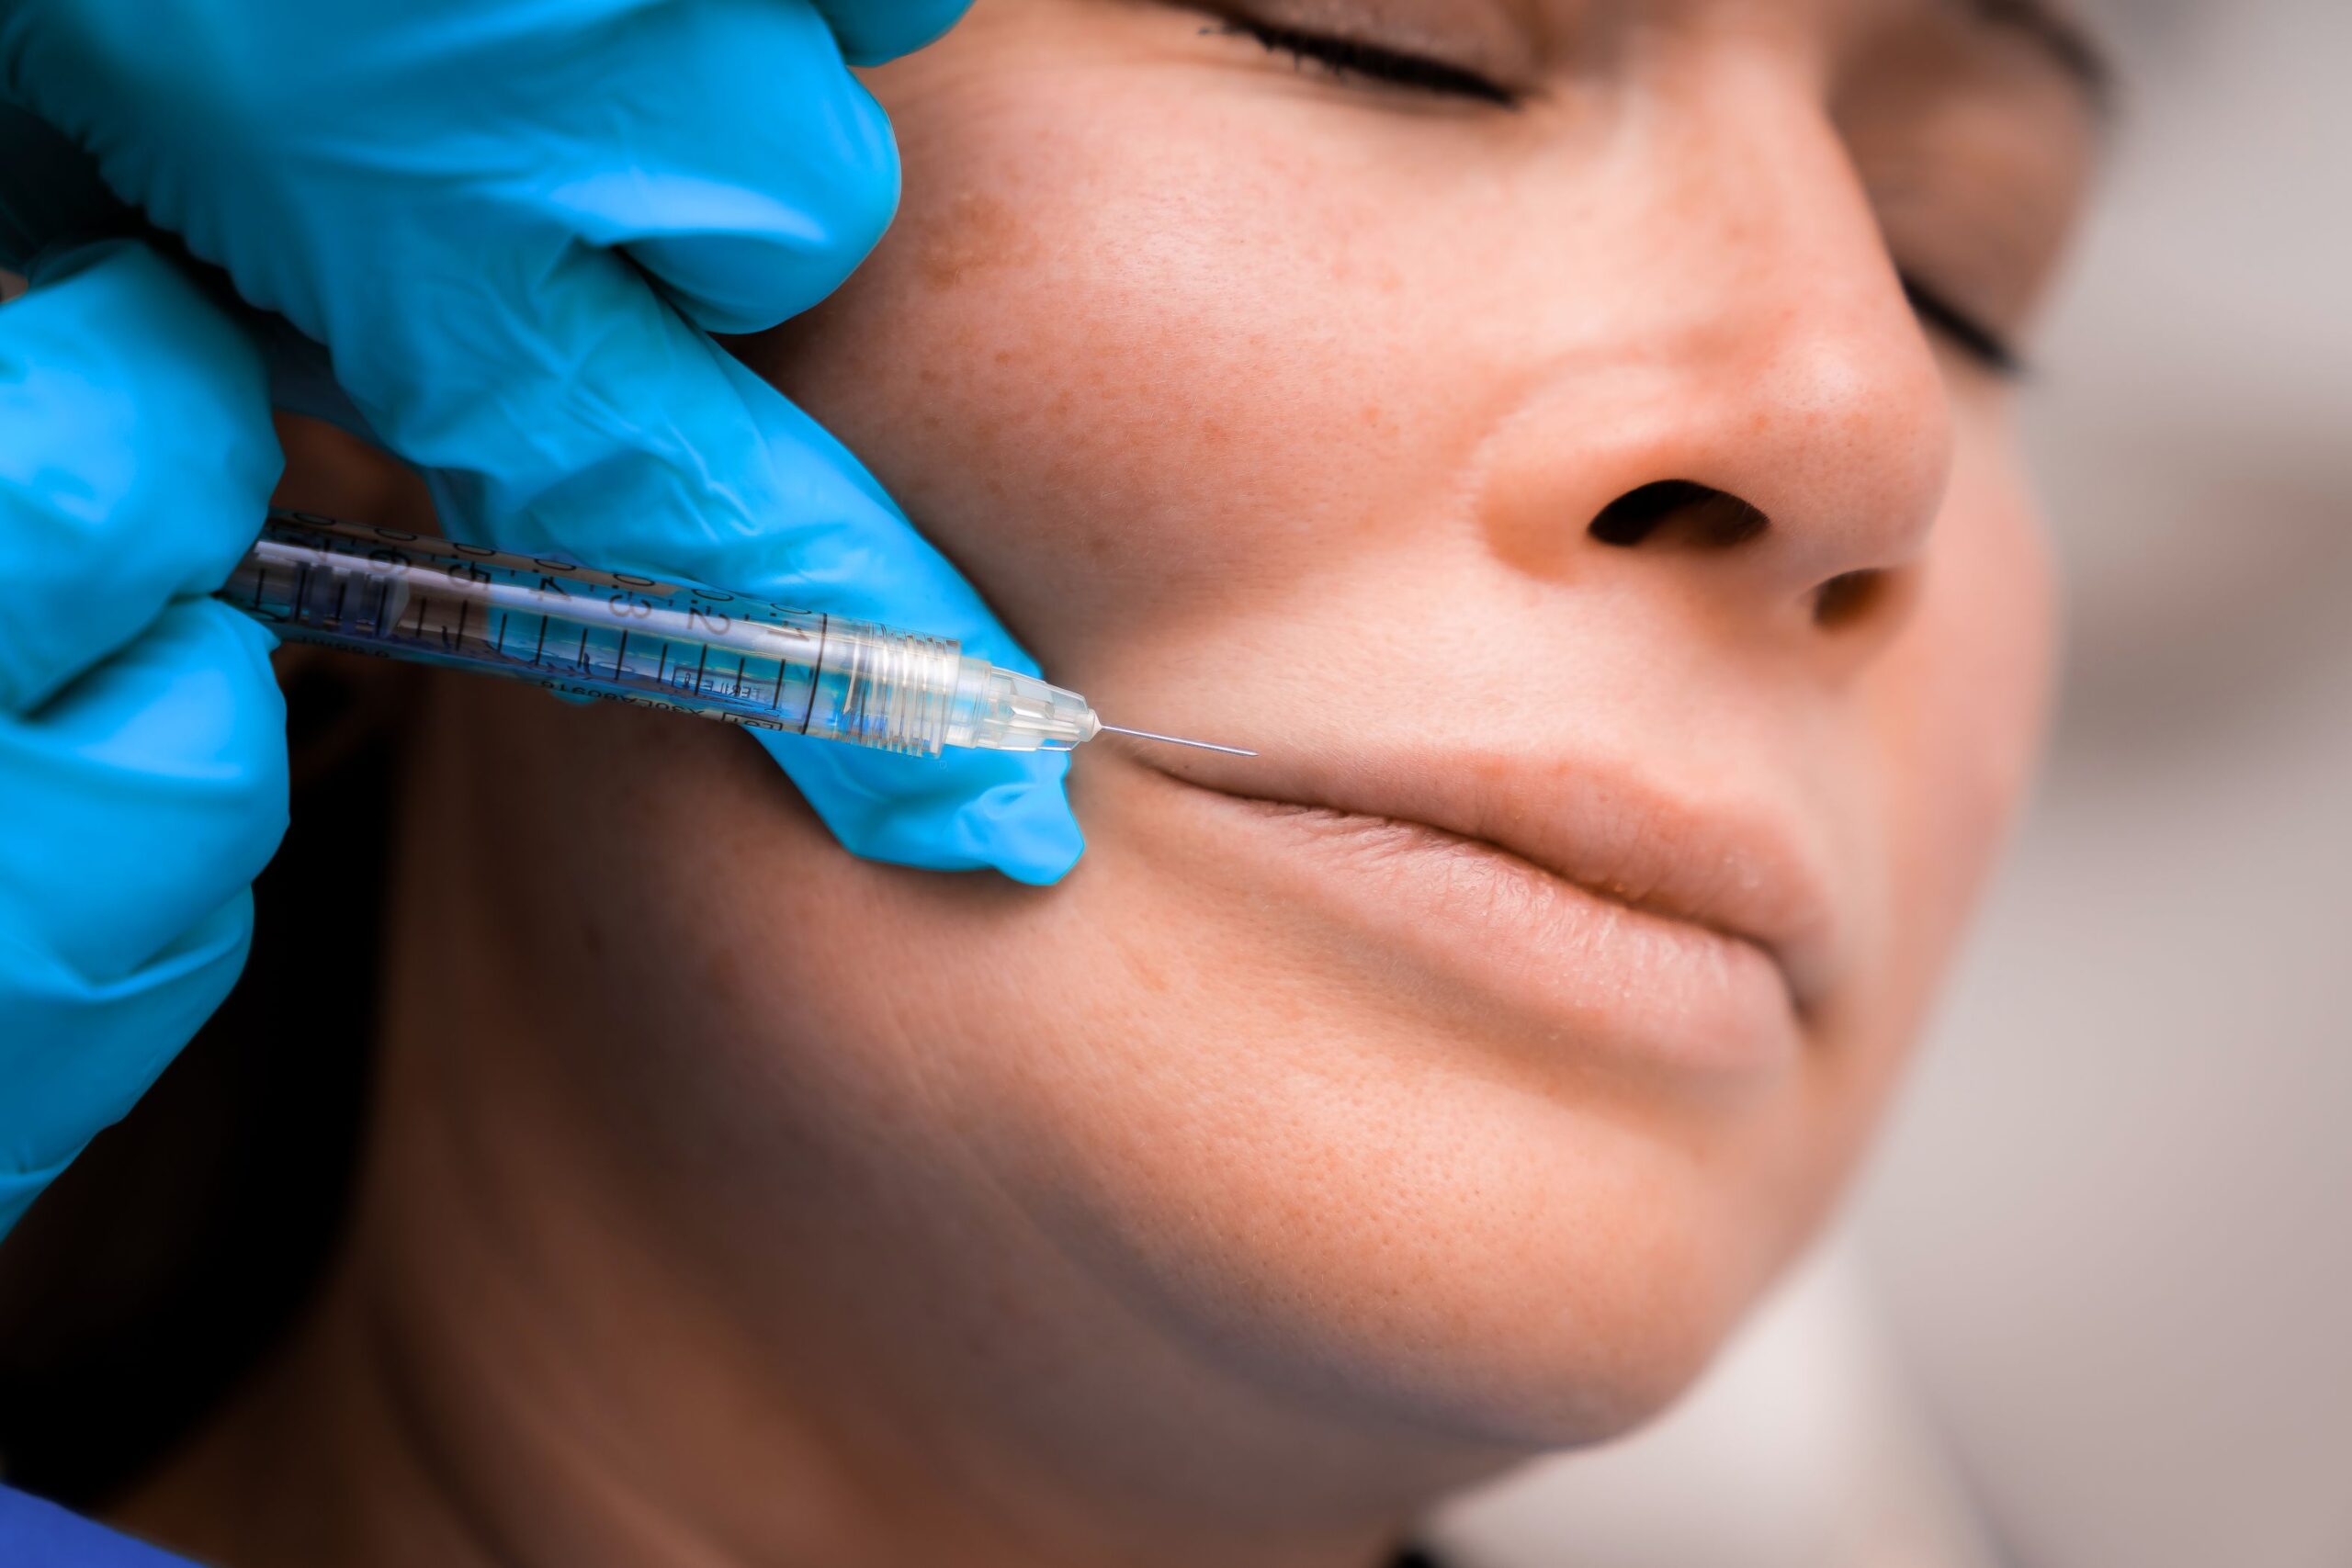 Lip Filler treatment for thin lips at Freyja Medical in Wrexham, Nantwich and Cheshire